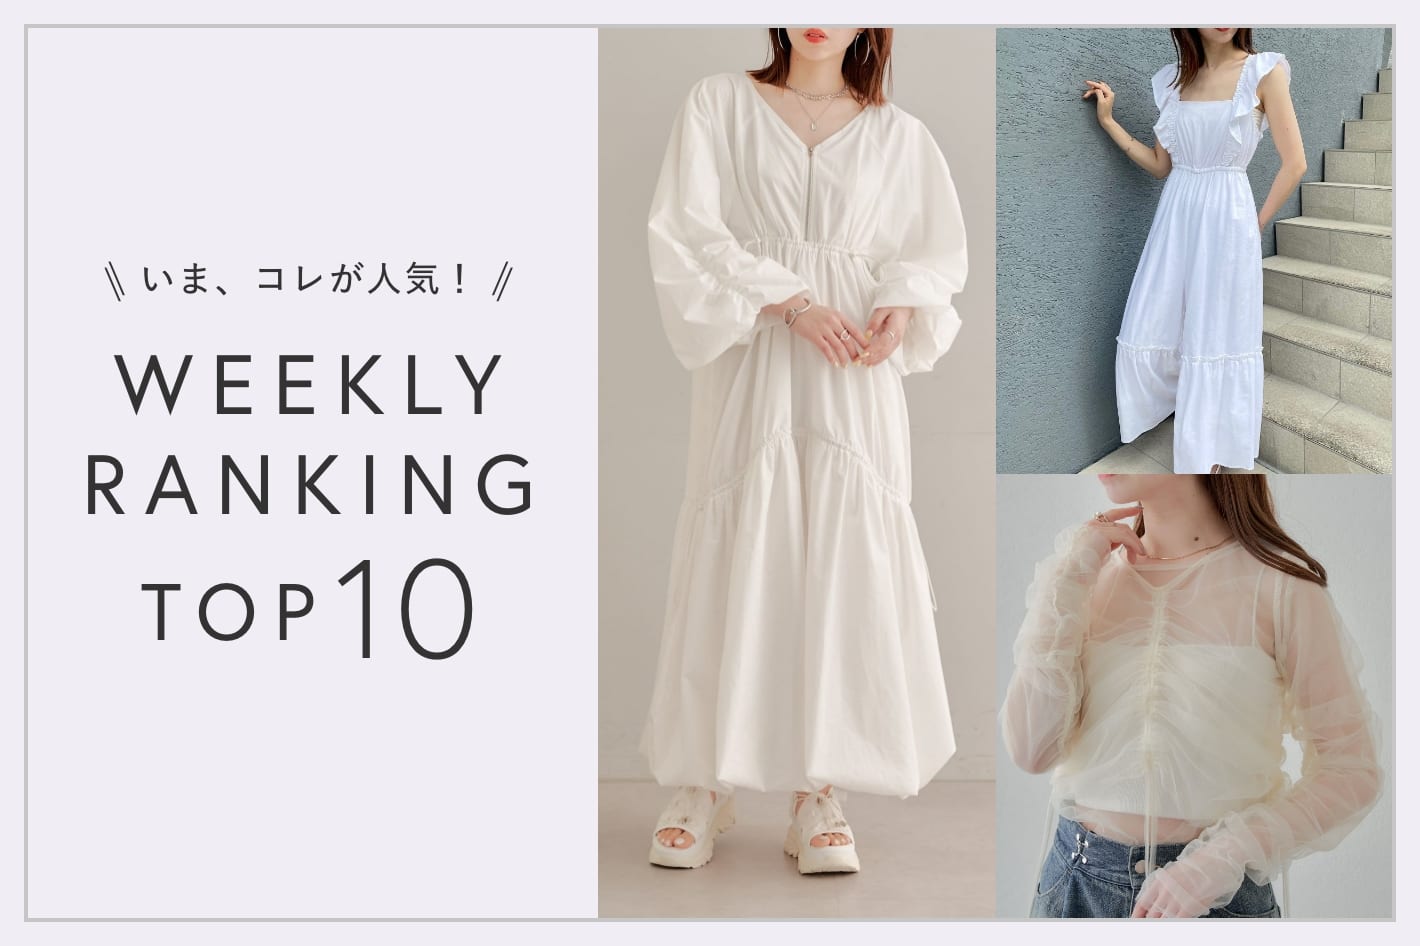 OUTLET いま、これが人気！WEEKLY RANKING TOP10！【5/7更新】